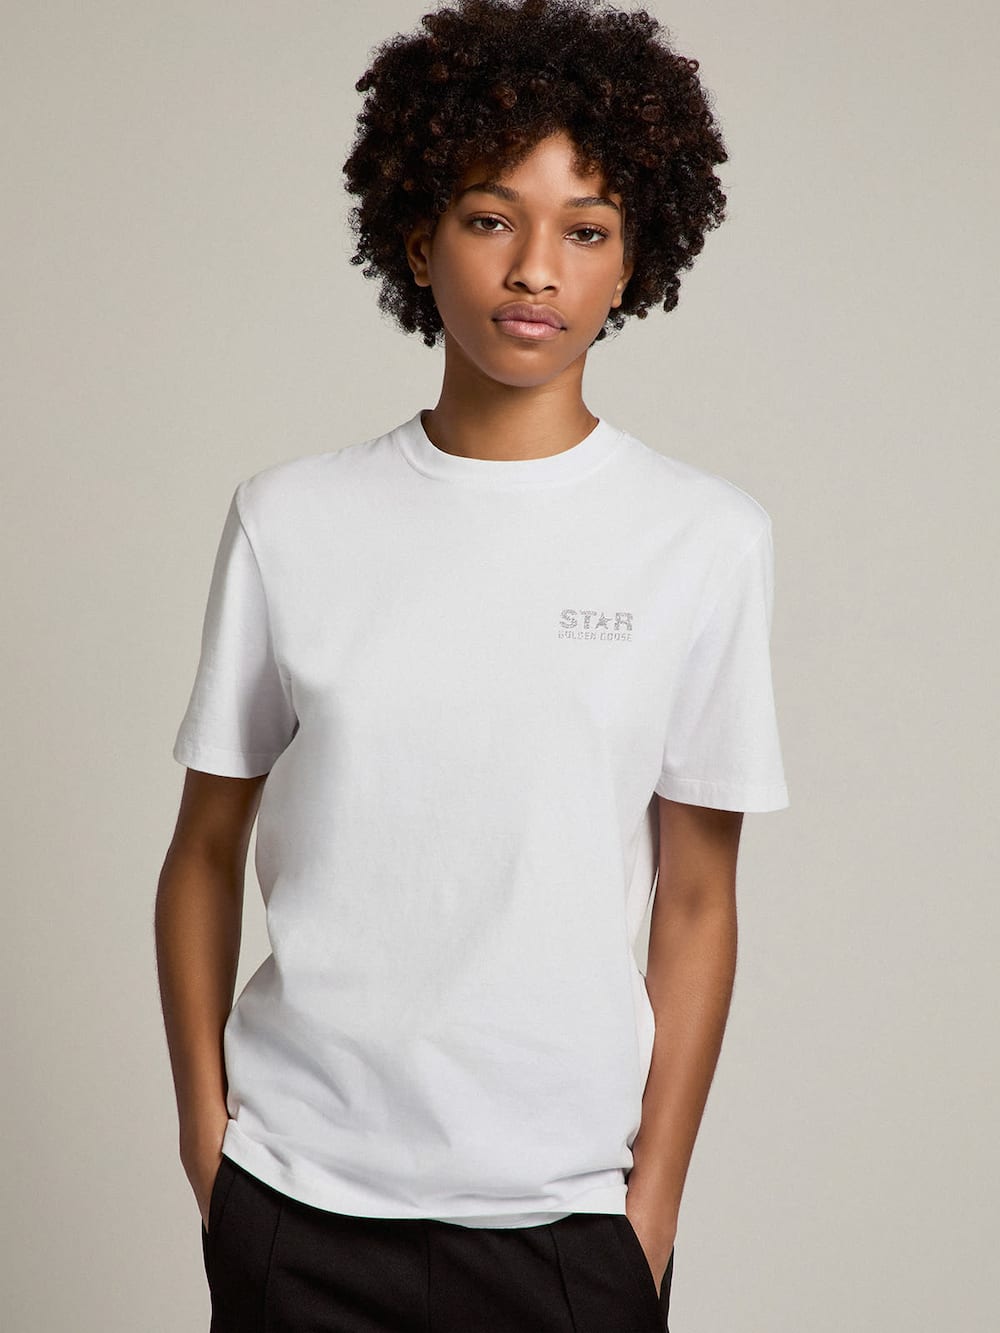 Golden Goose - Women's white T-shirt with silver glitter logo and star in 